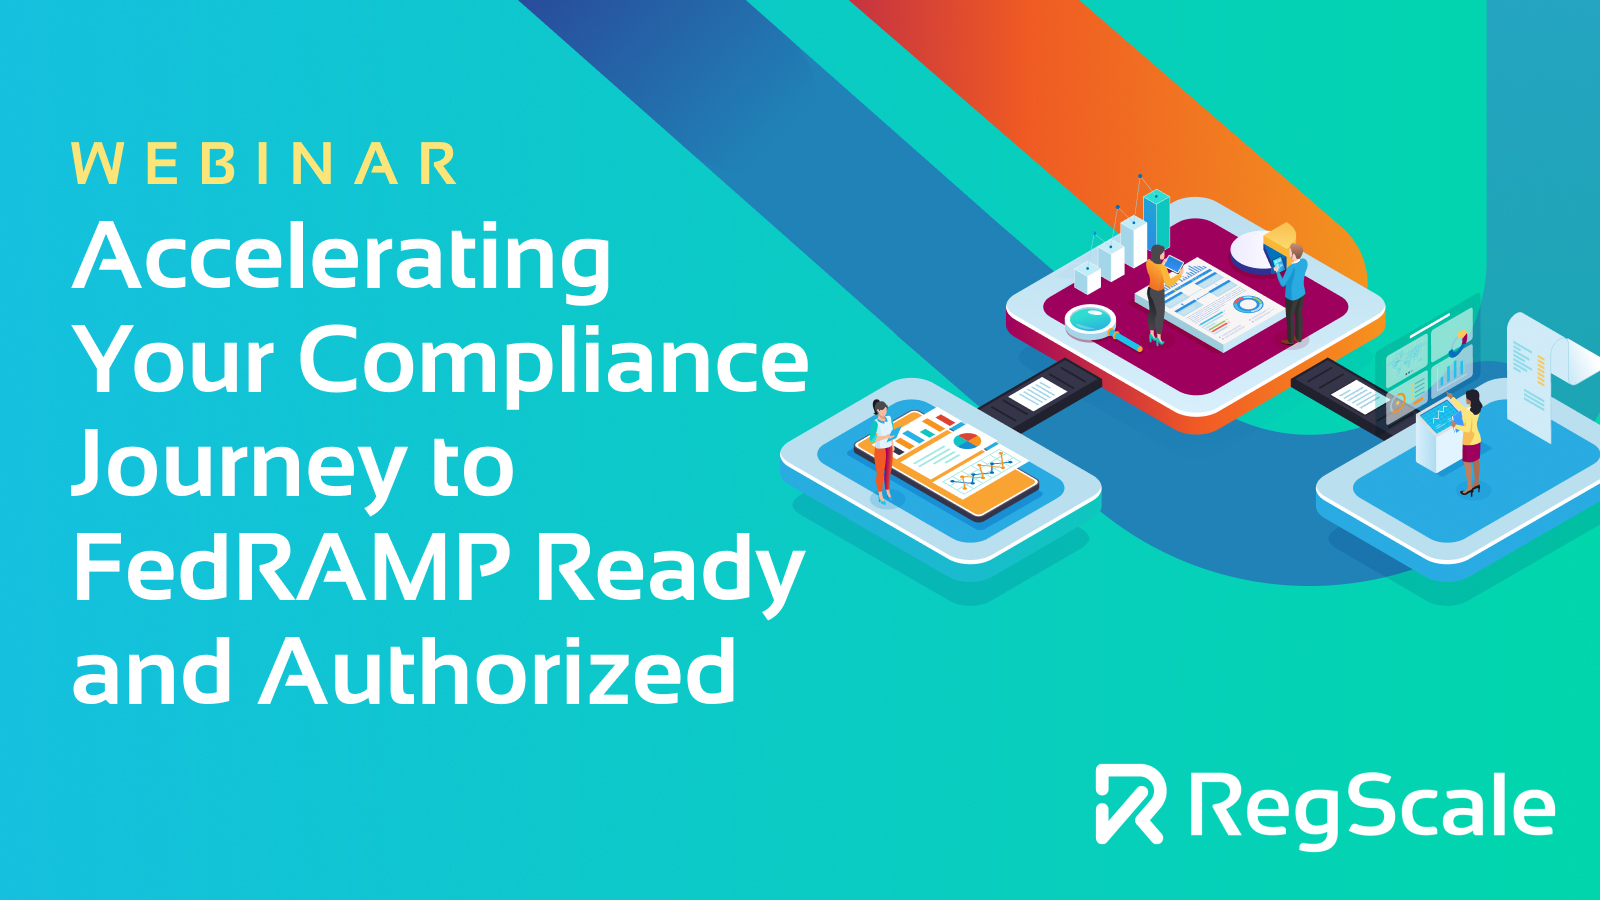 LP-Webinar_ Accelerating Your Compliance Journey to FedRAMP Ready and Authorized